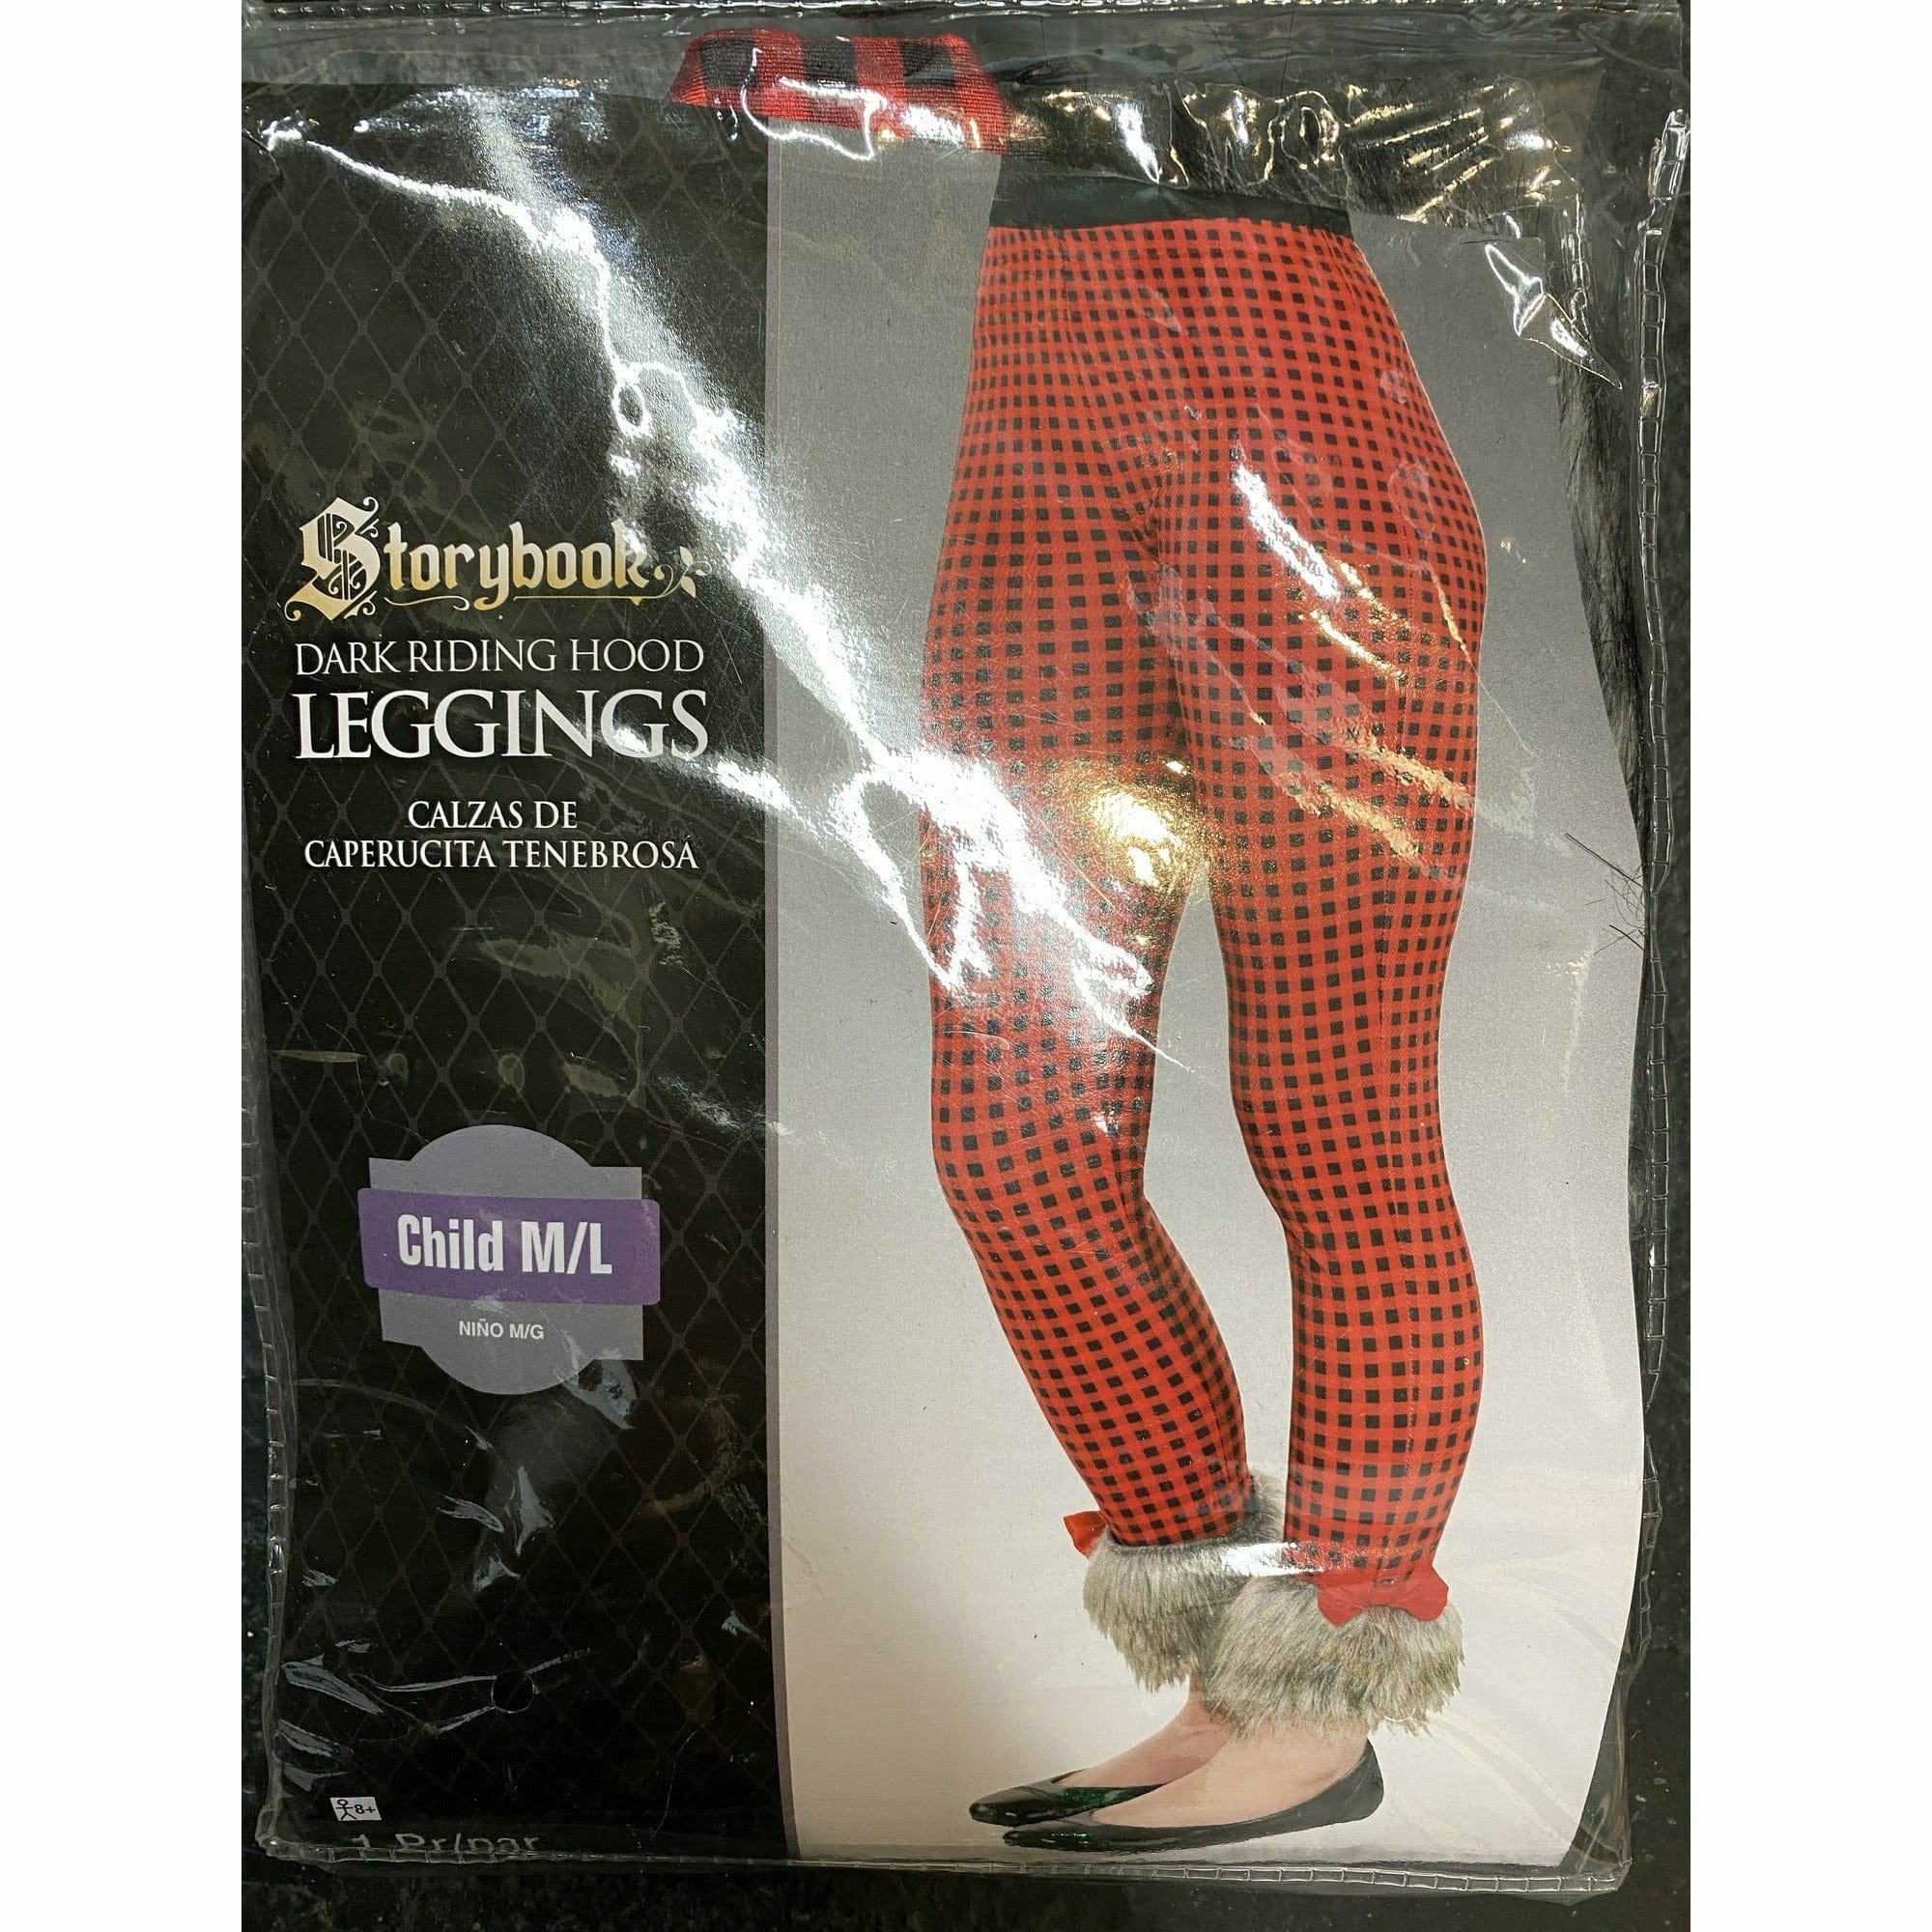 COSTUMES USA Child M/L Up to size 14 Storybook Dark Riding Leggings